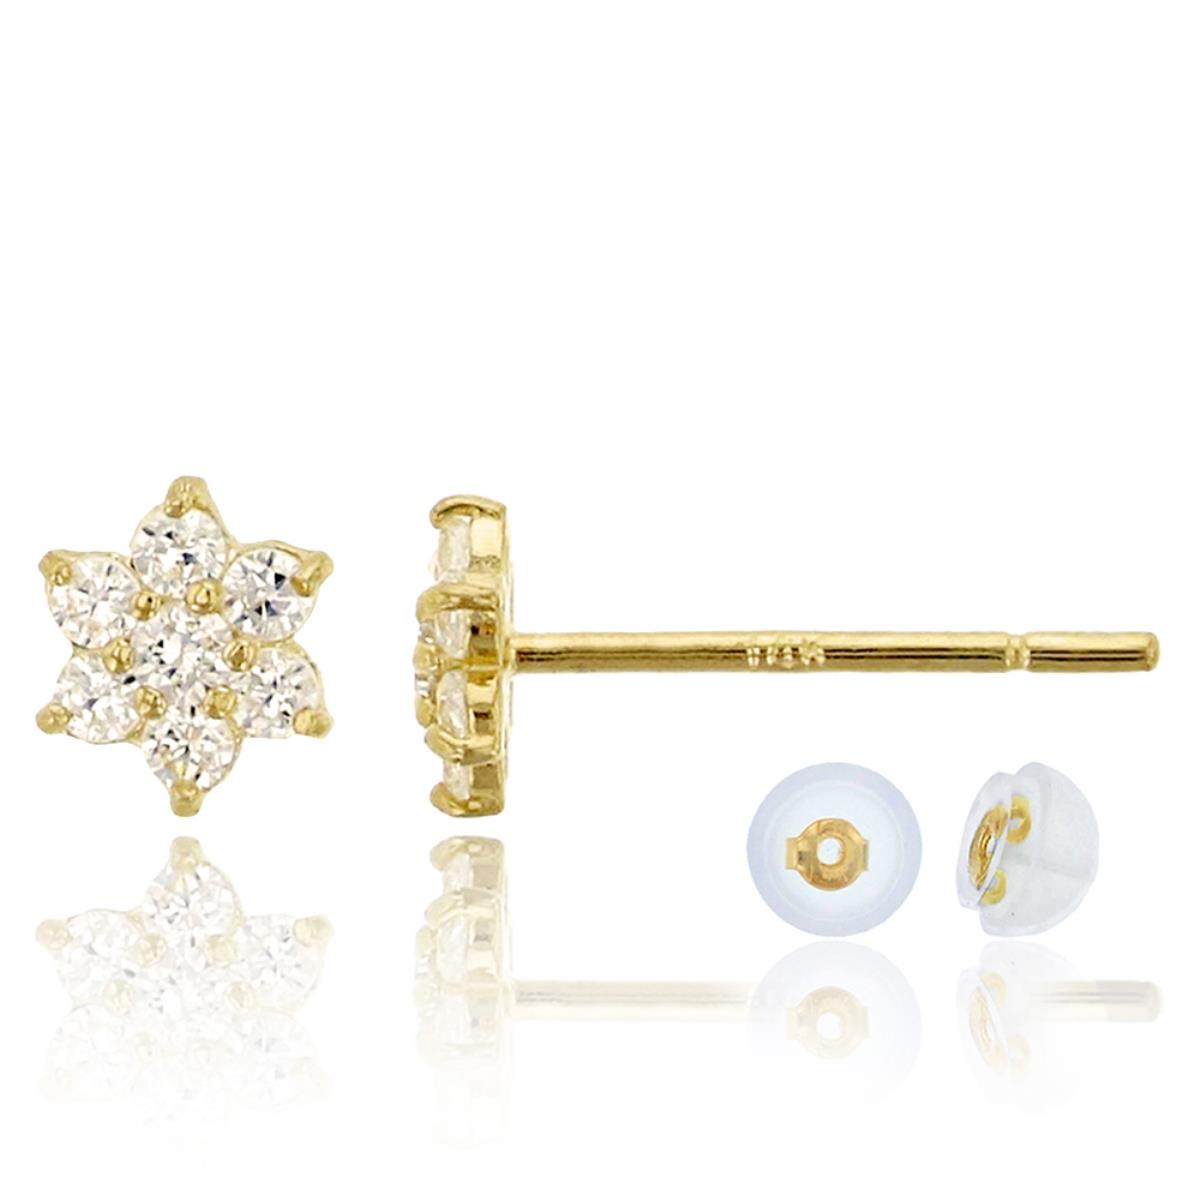 10K Yellow Gold Pave Small Flower Stud Earring & 10K Silicone Back